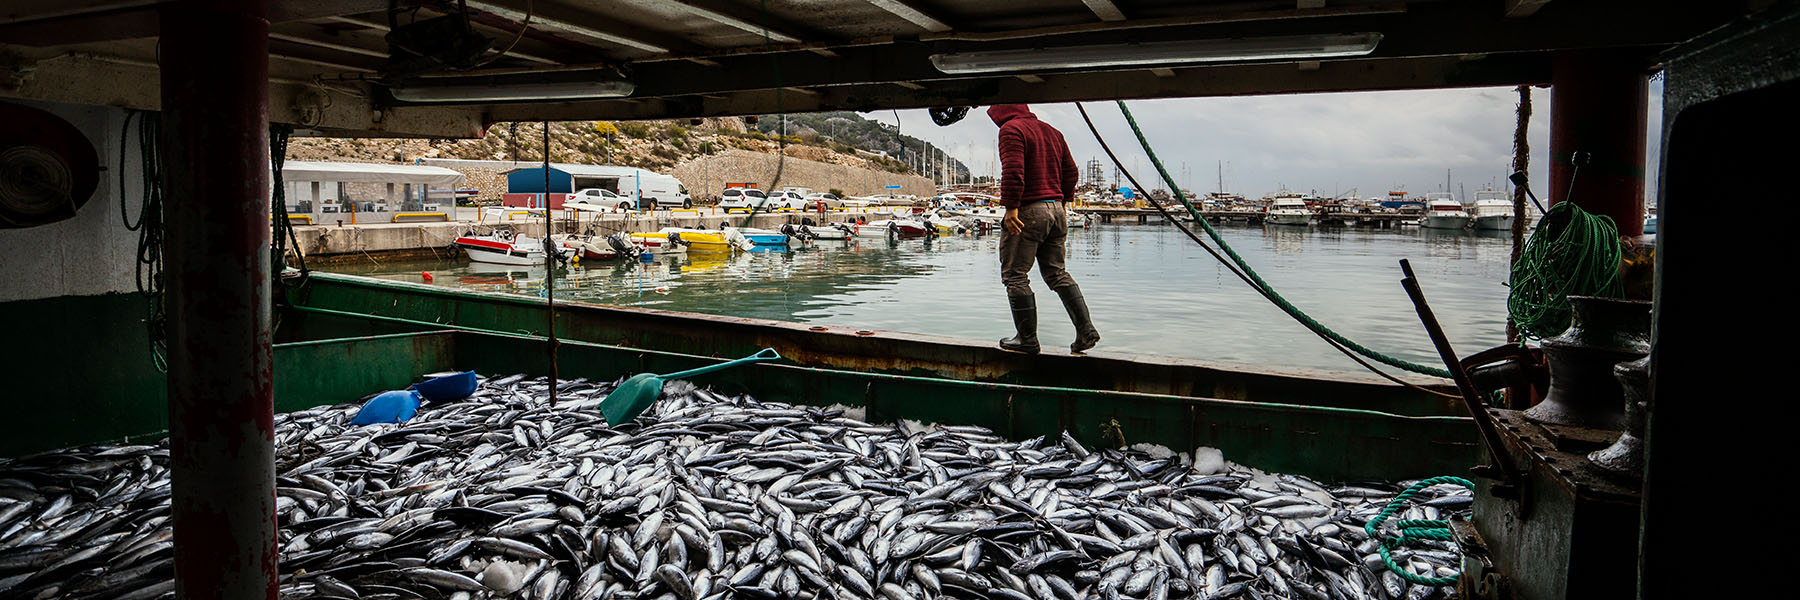 Labor Trafficking in the Fishing Industry